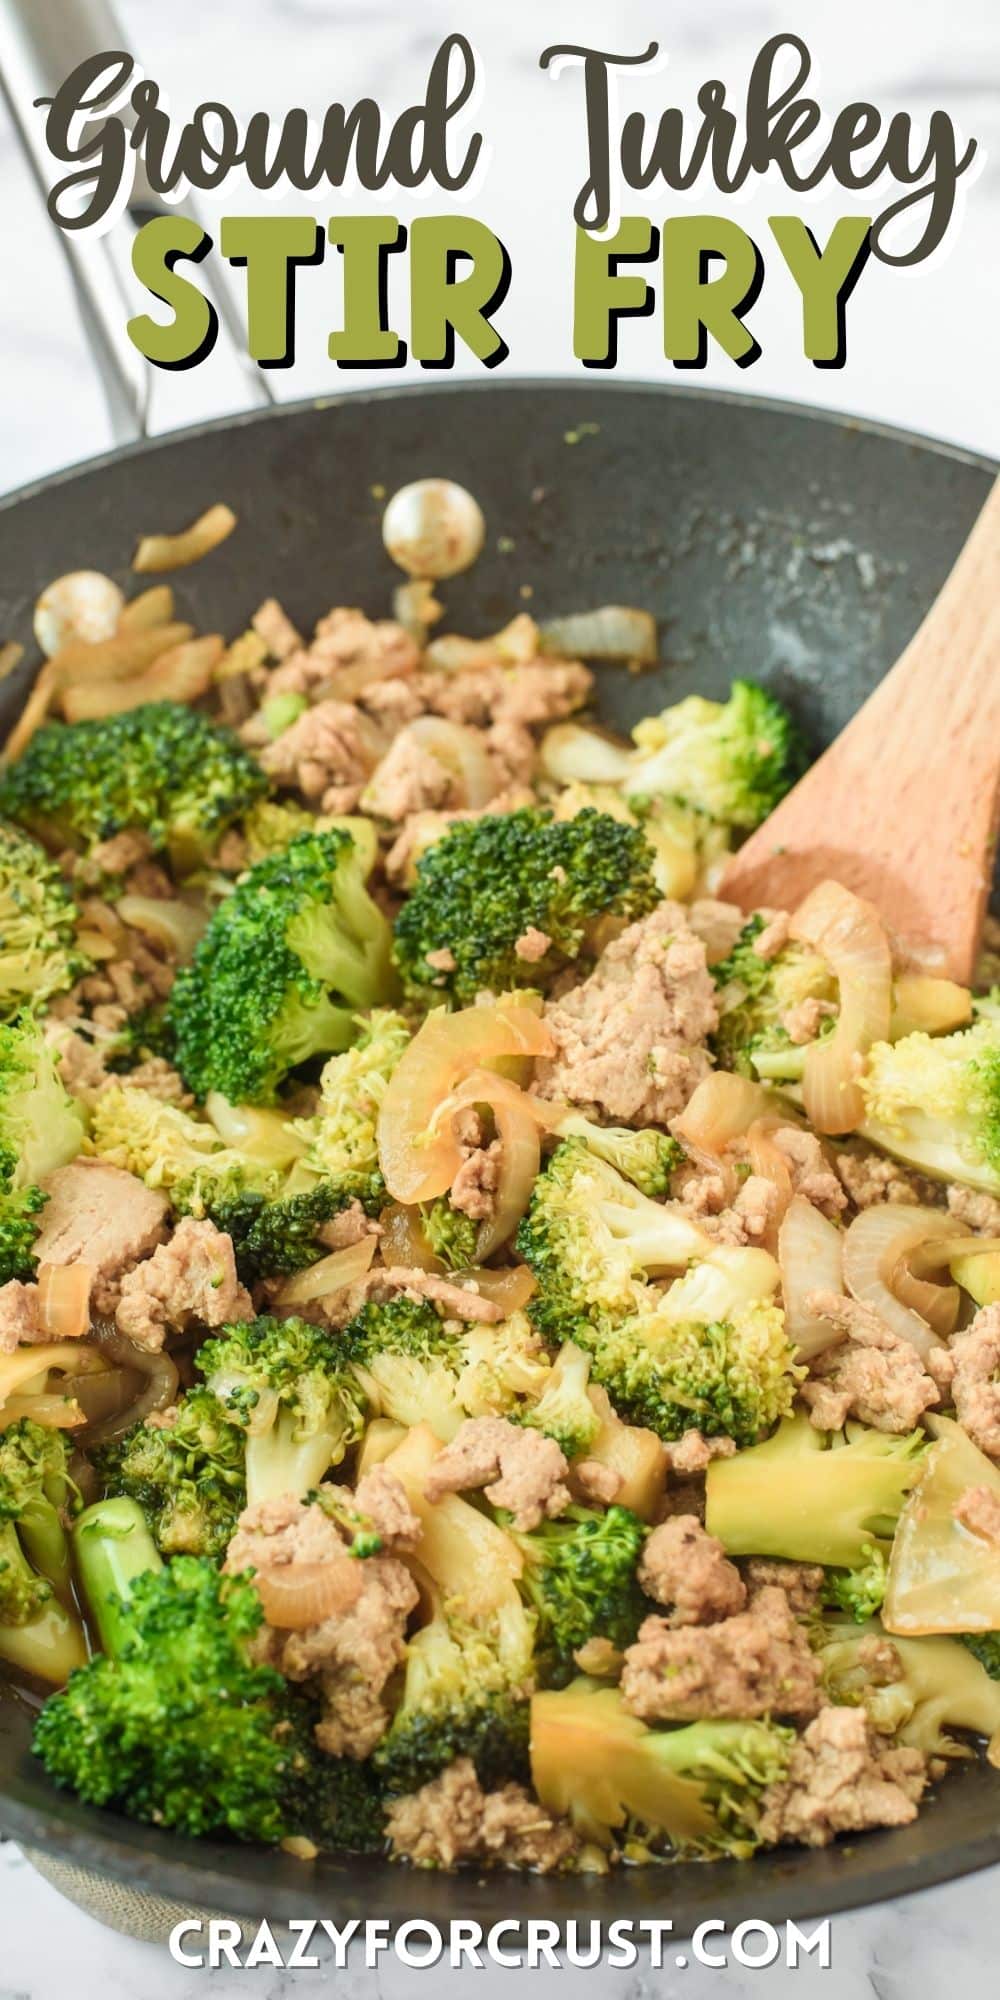 broccoli and meat mixed together in a black pan with words on the image